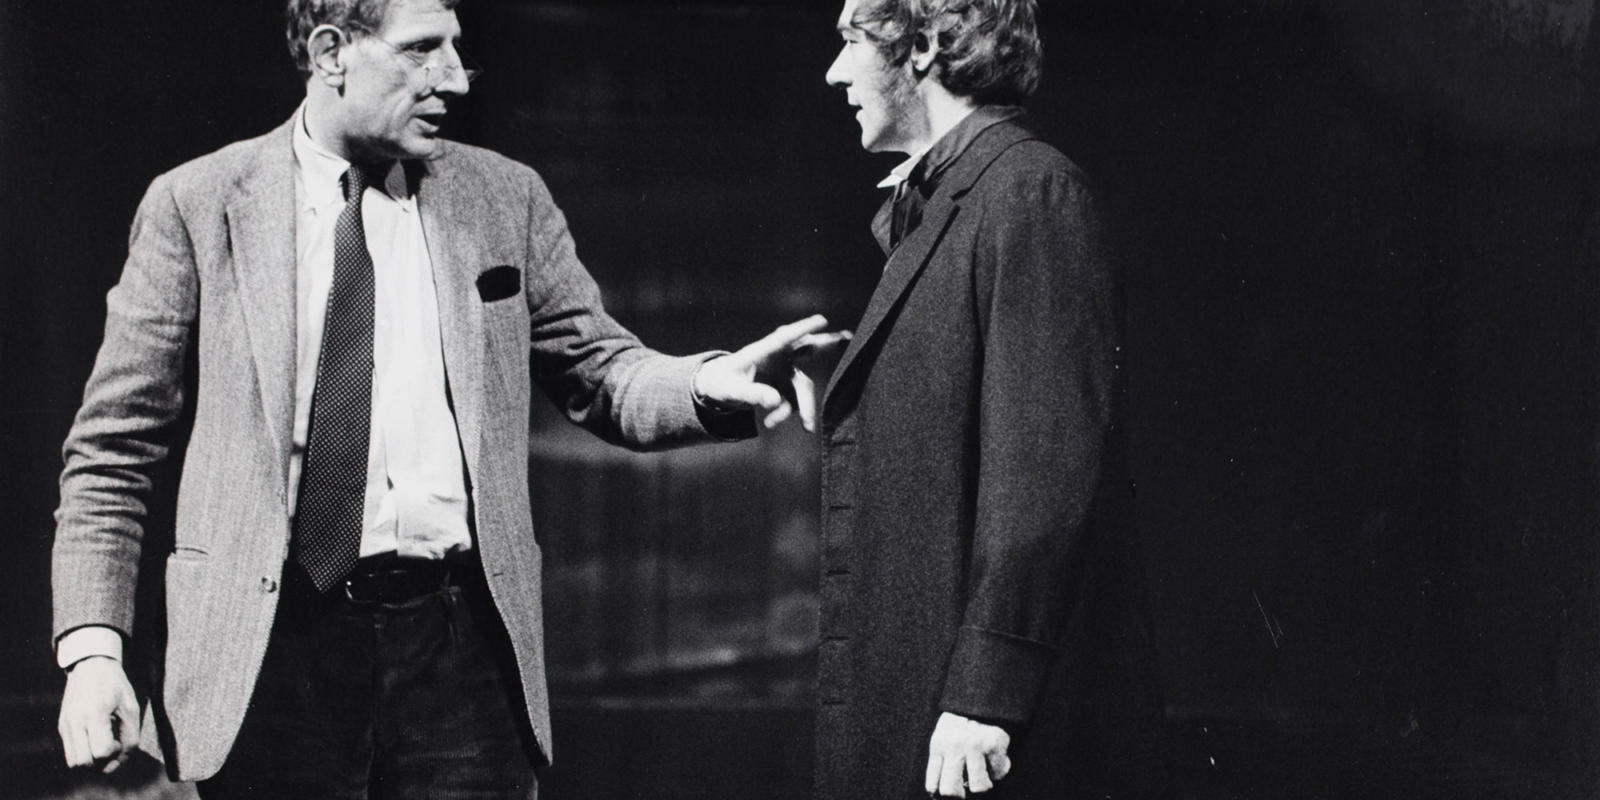 ENO The Turn of the Screw 1979: Director Jonathan Miller and Philip Langridge. With thanks to Gareth Roberts